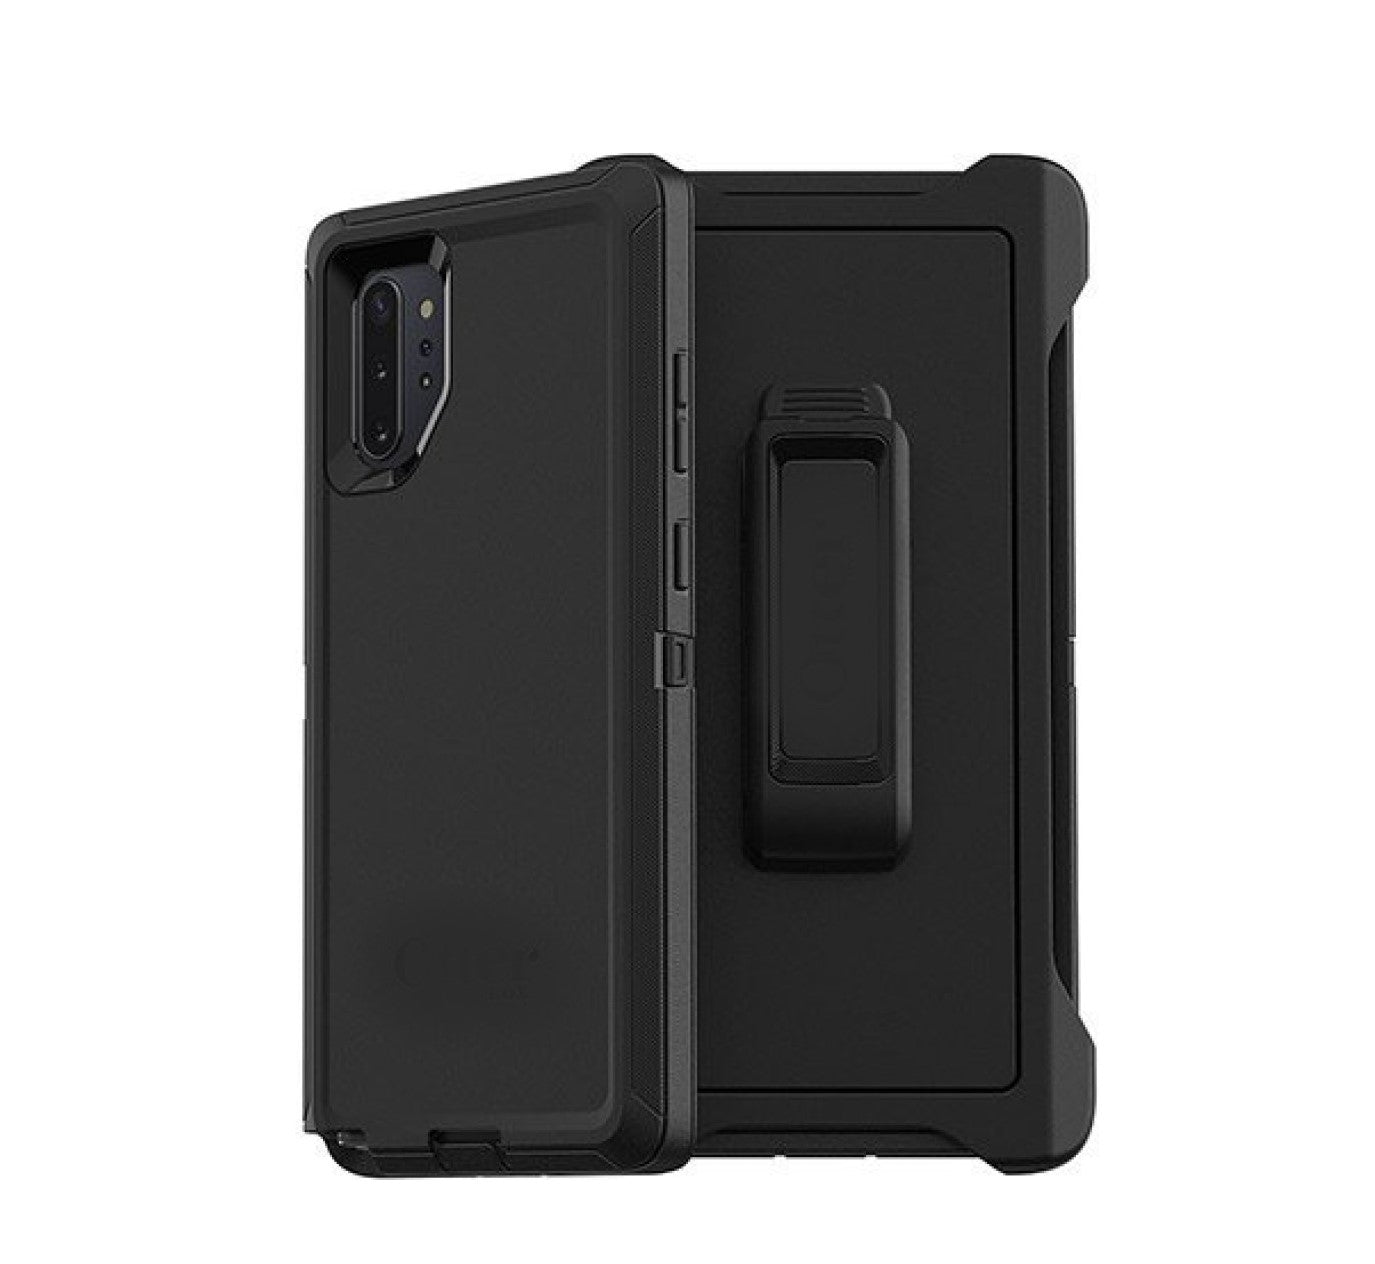 Case- Defender Case with Clip (For Note 10 Plus/ Note 10/ Note 9/ Note 8) - Black Color